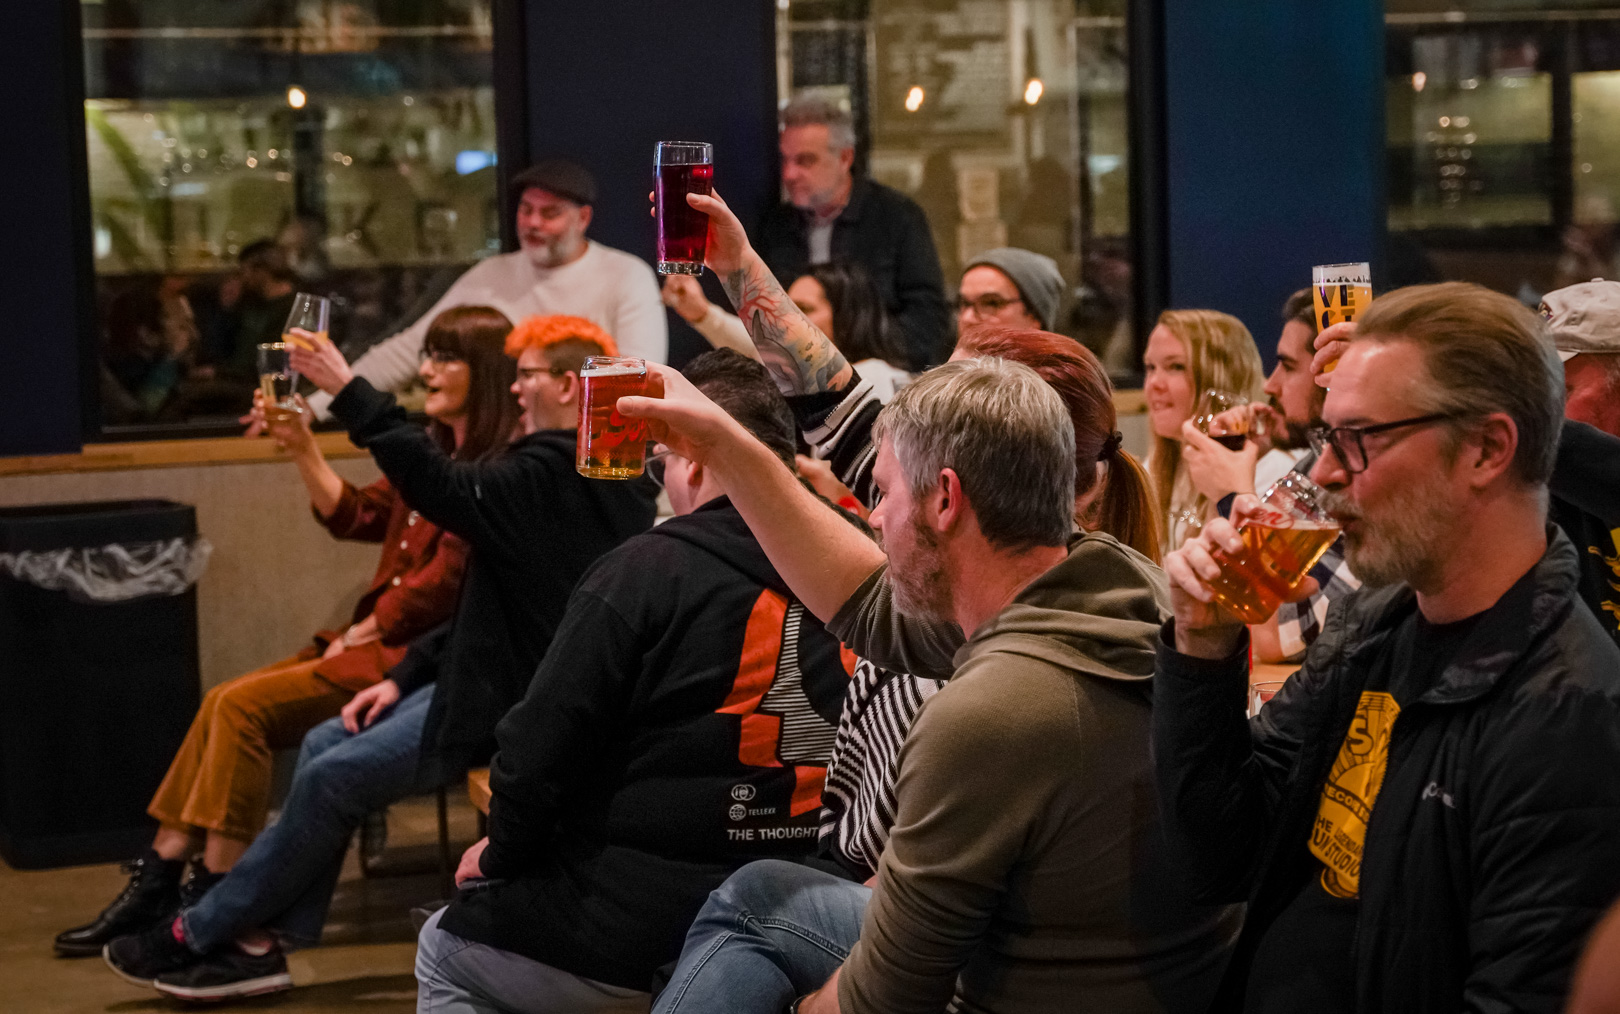 A crowd sitting raising glasses of beer